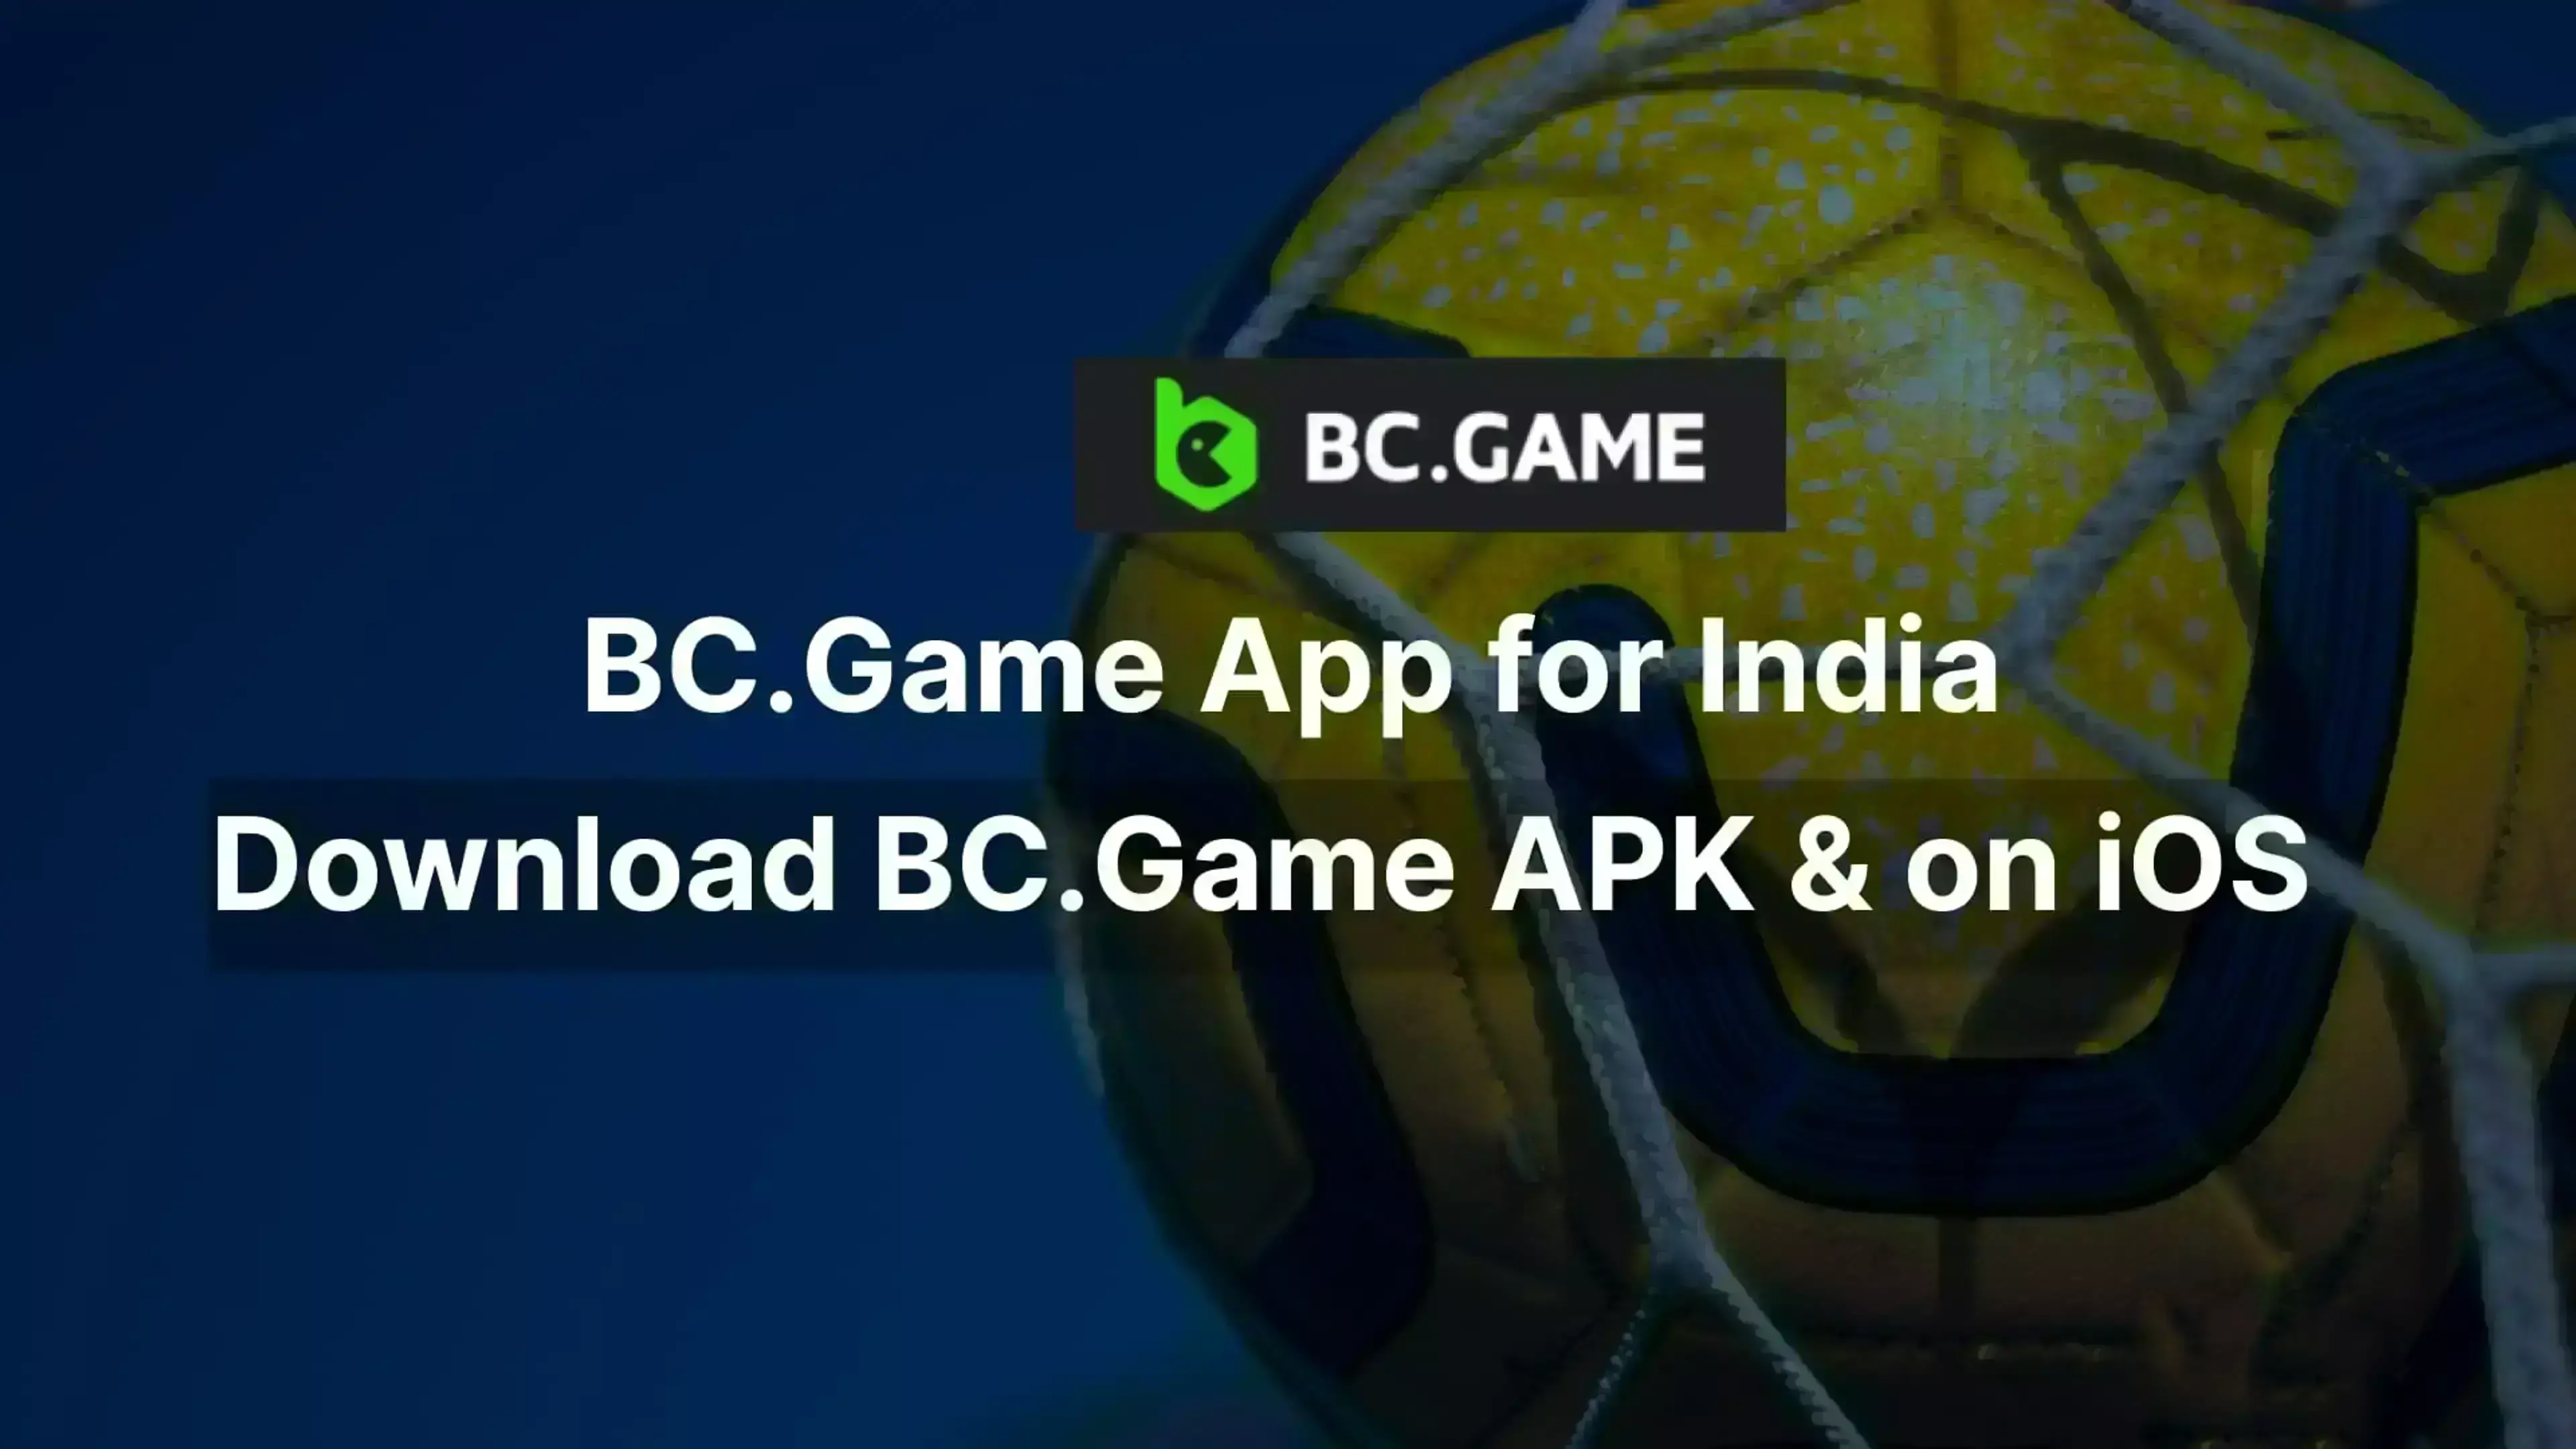 BC Game App for Android Features and Benefits